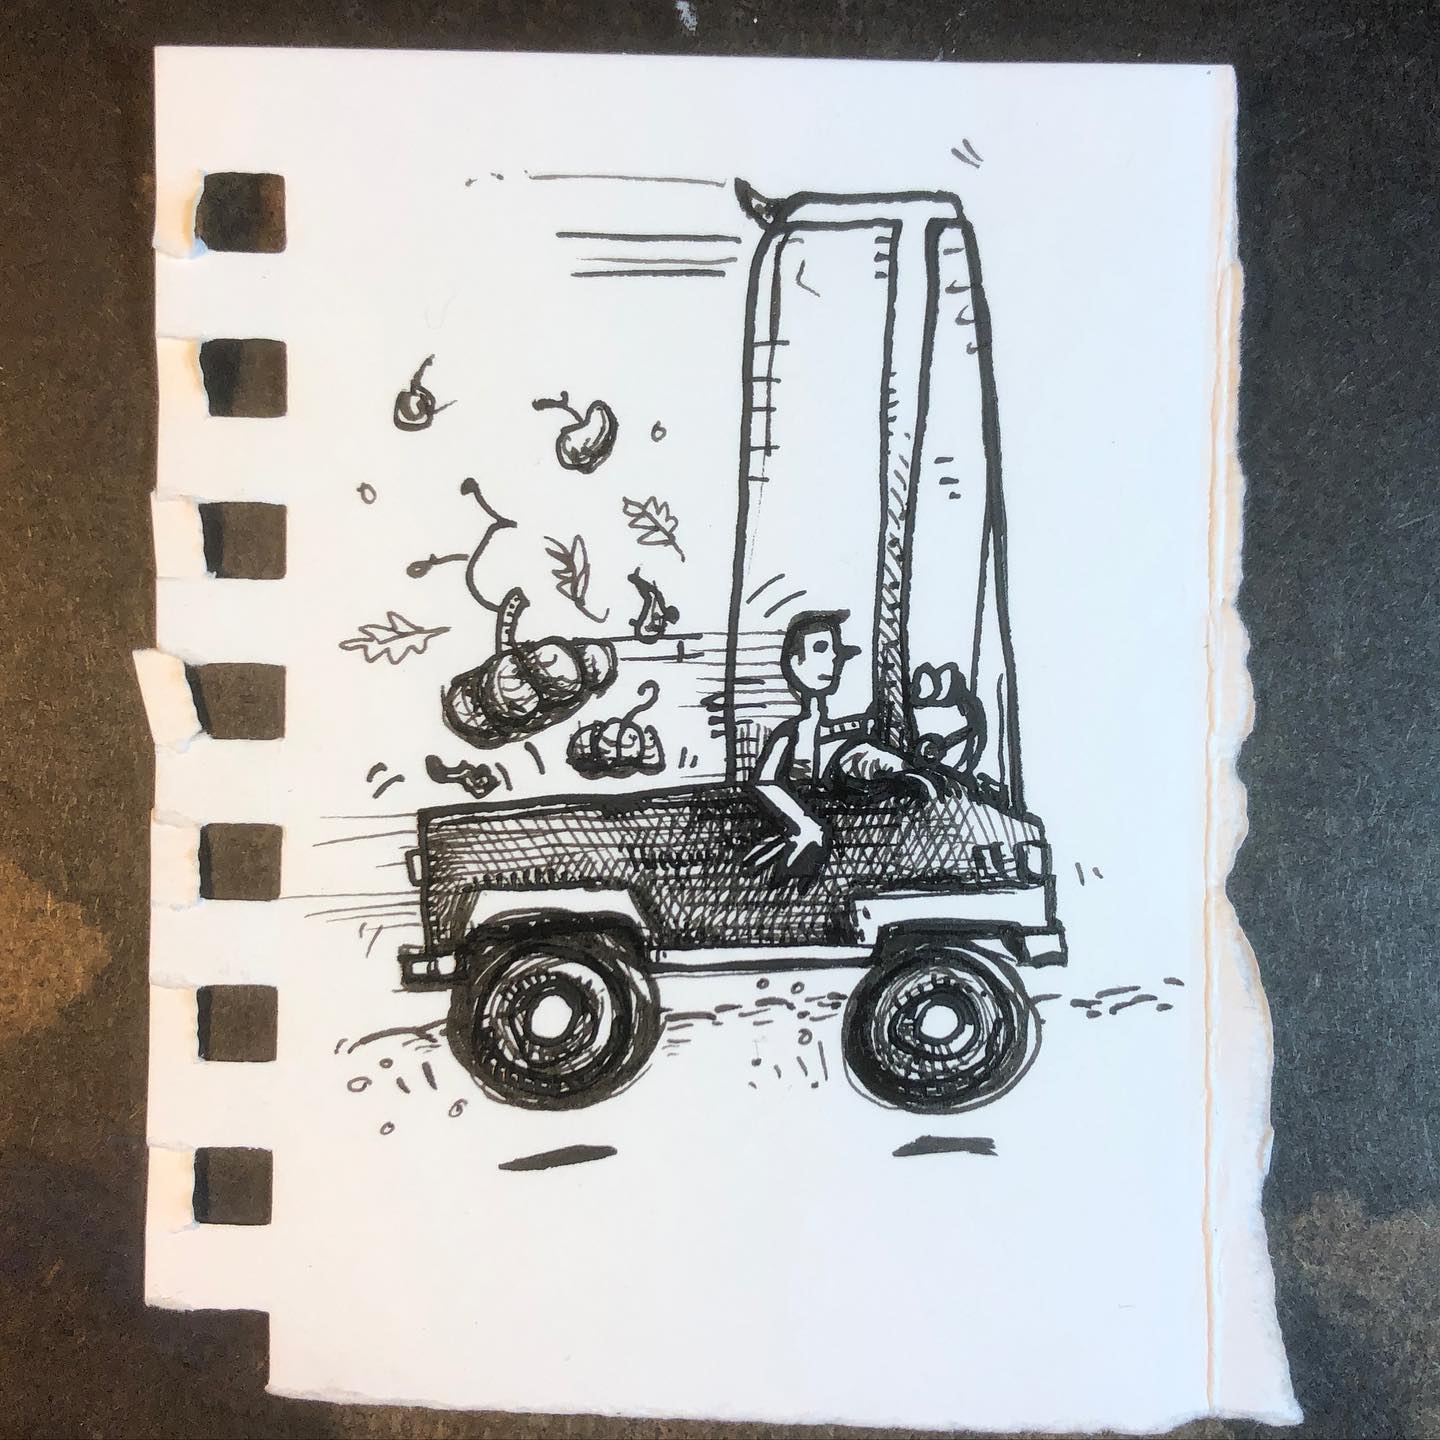 Ink Drawing - "Pumpkin Delivery"